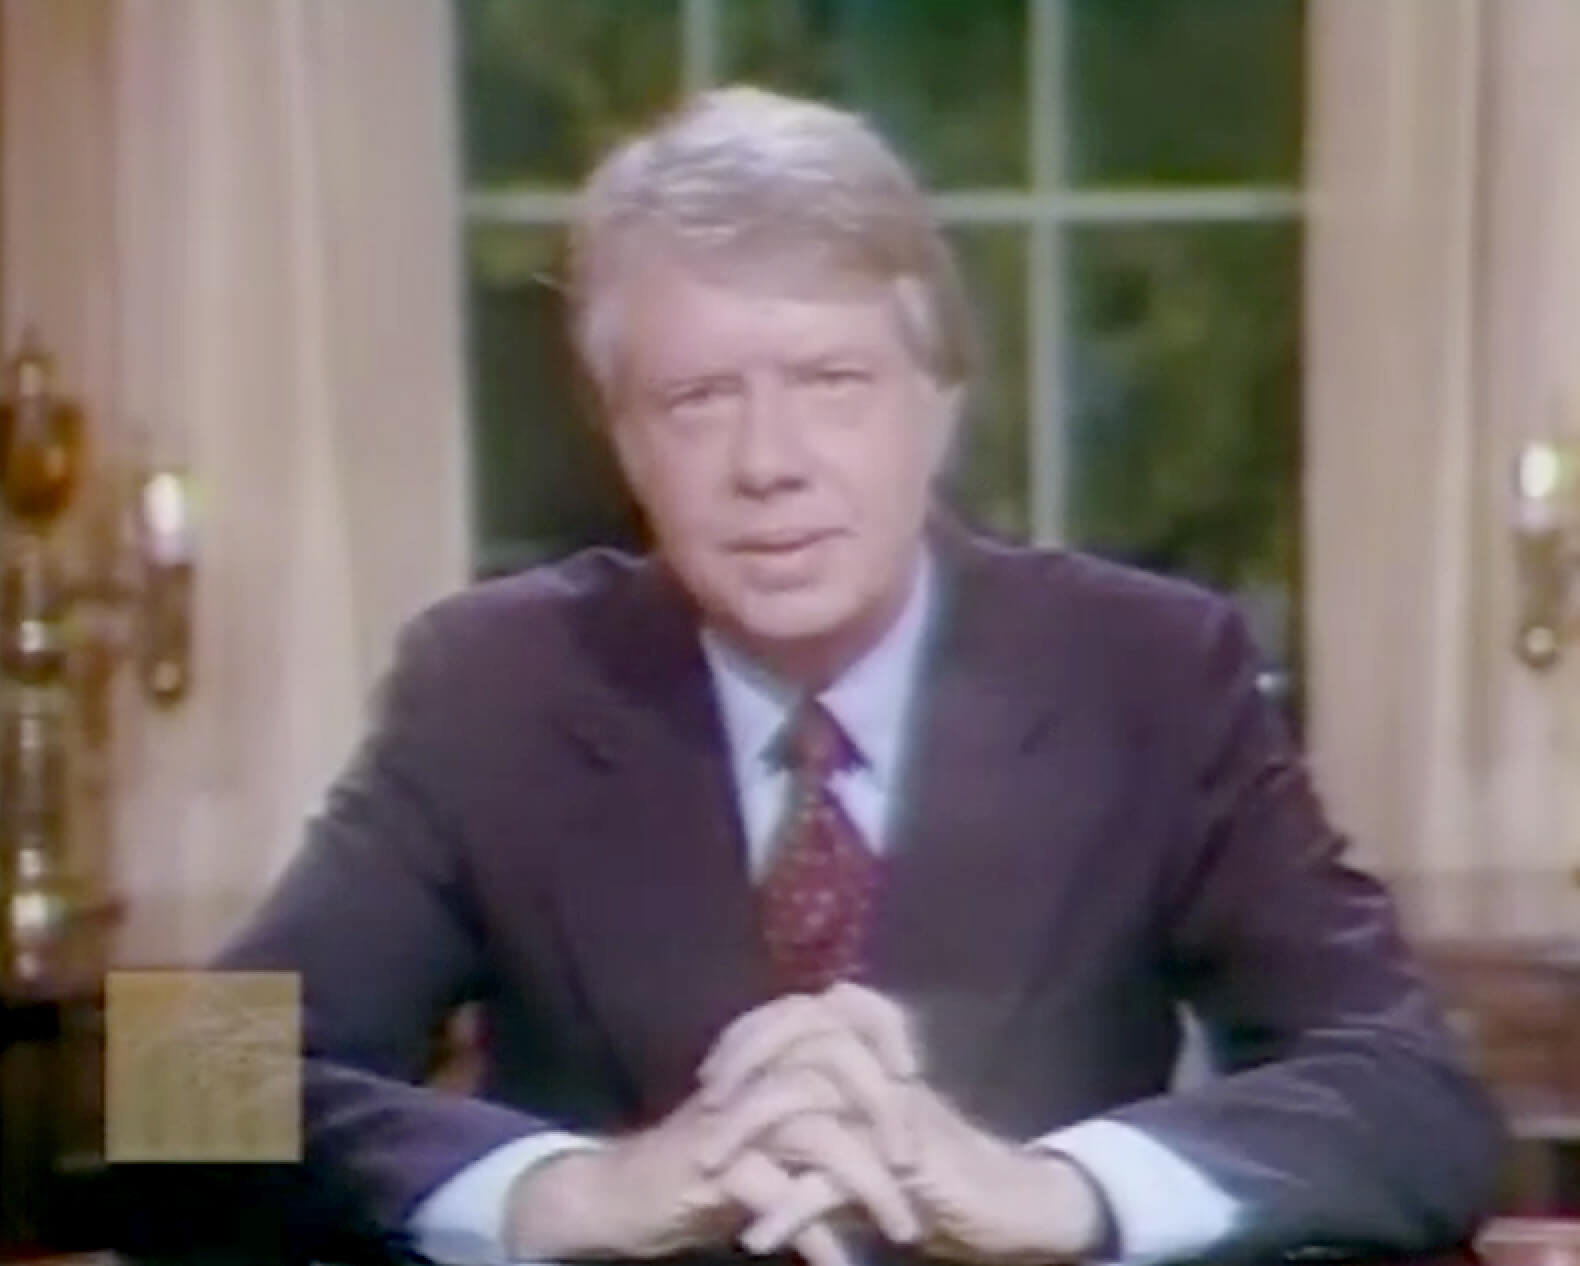 Jimmy Carter addressing the nation